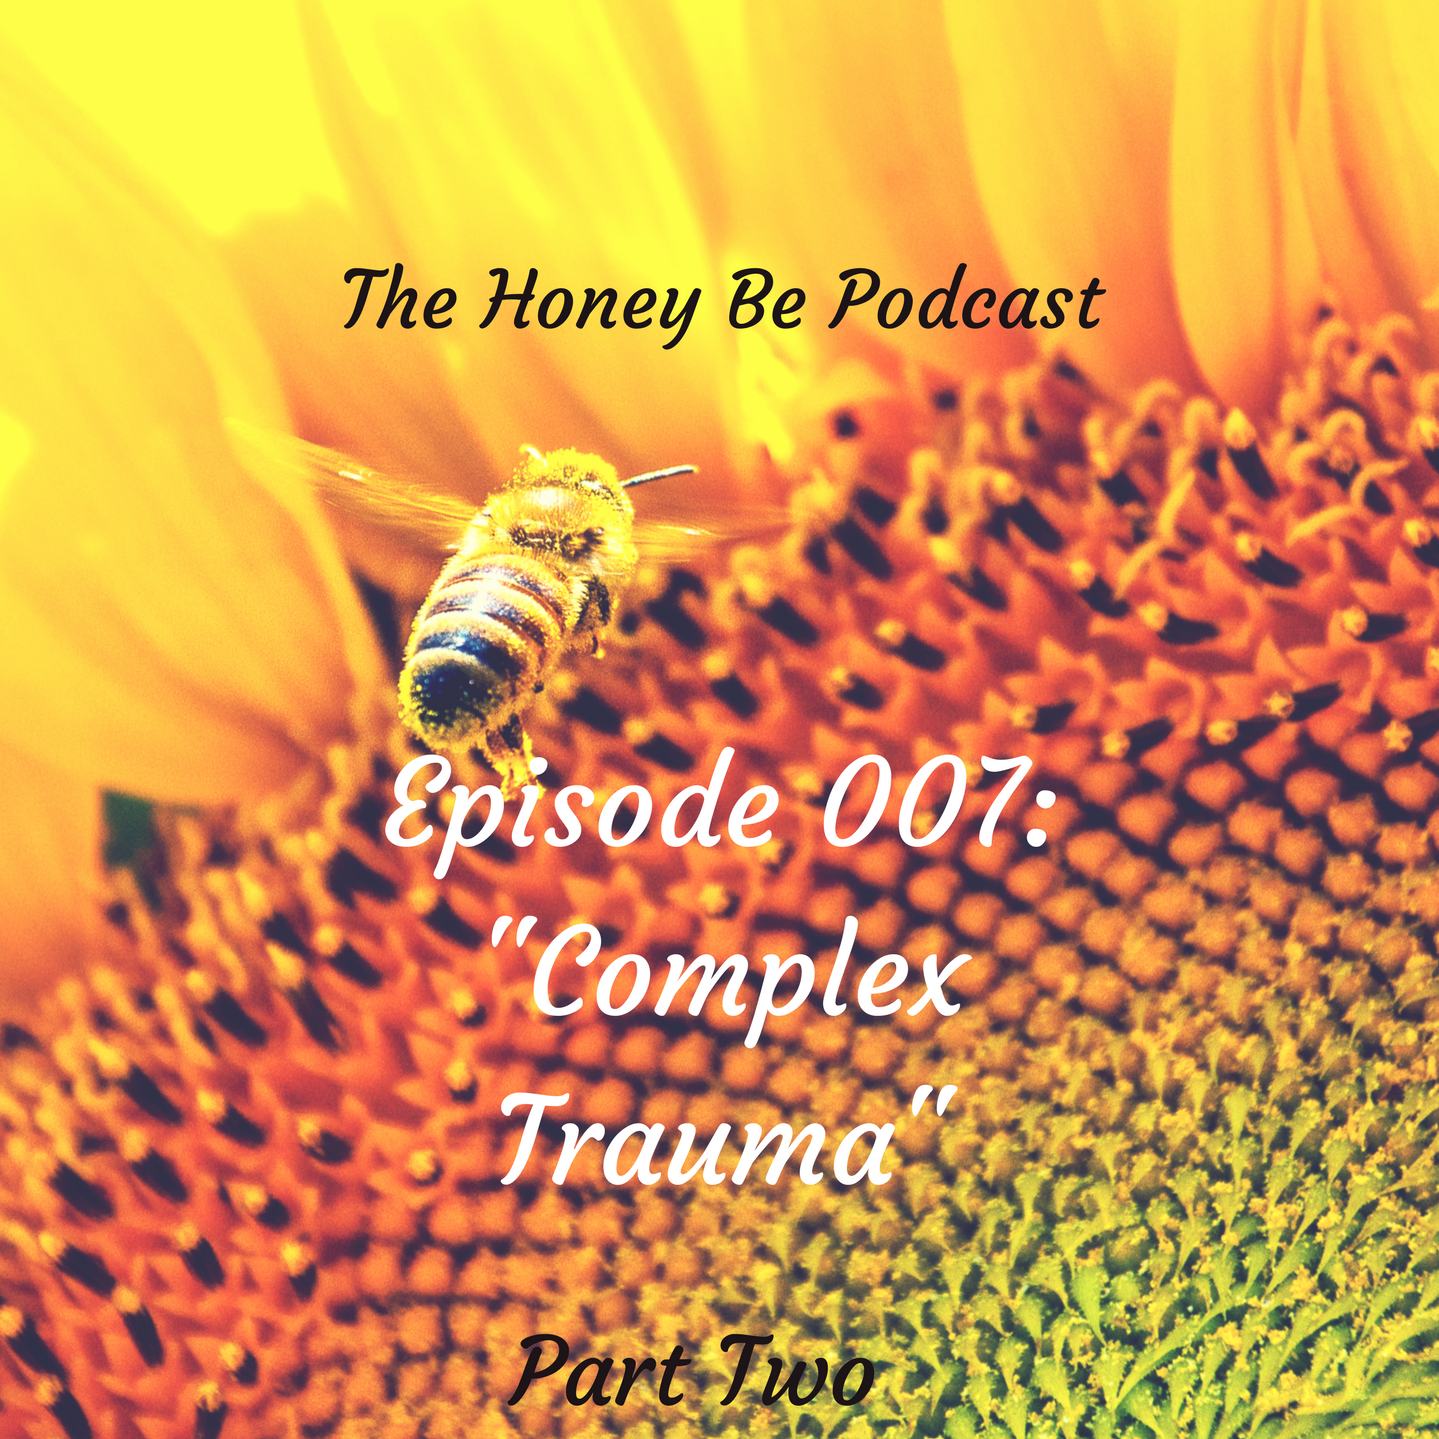 The Honey Be Podcast – Episode 007: “Complex Trauma – Part Two”